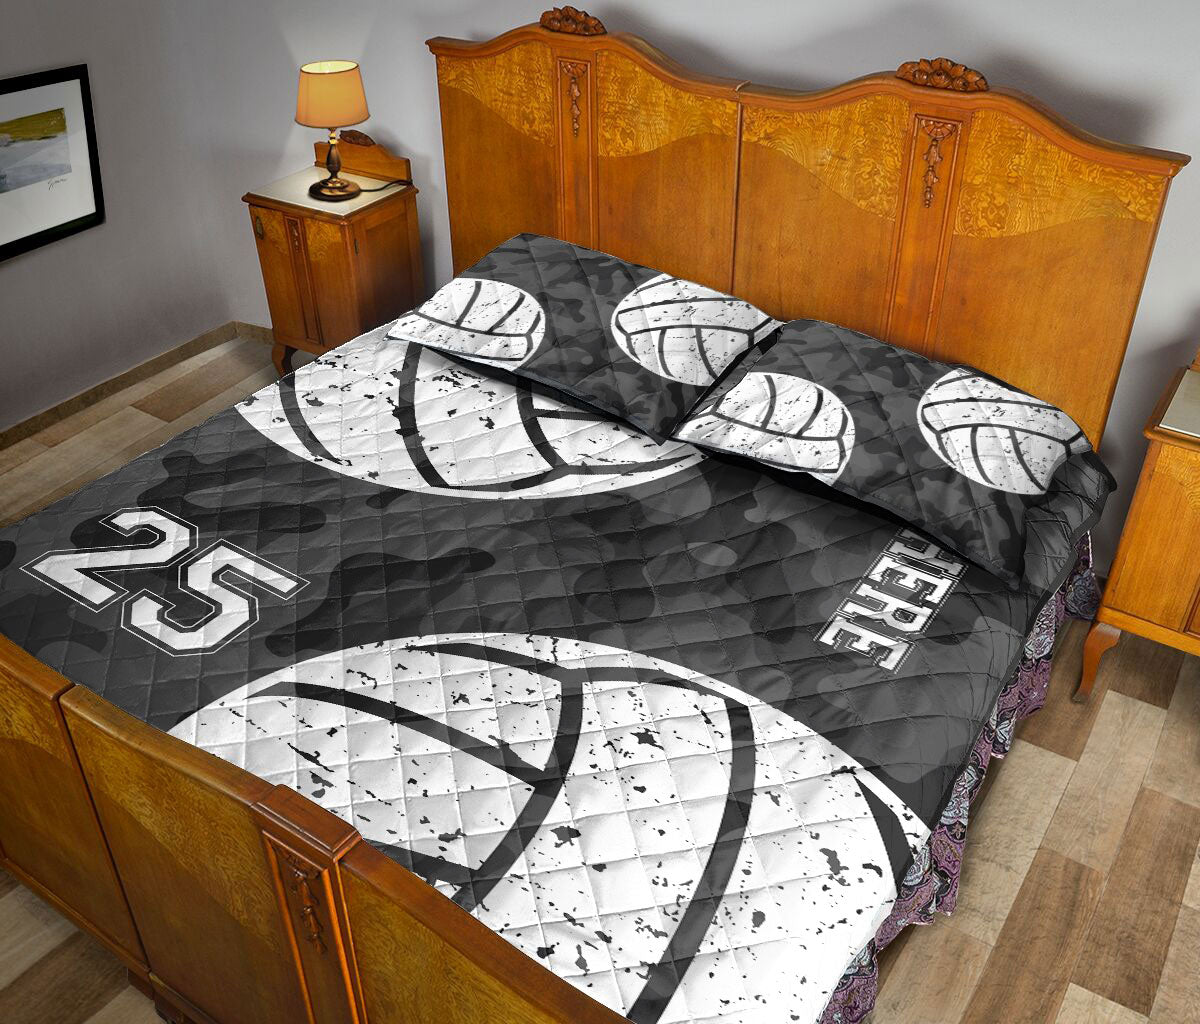 Ohaprints-Quilt-Bed-Set-Pillowcase-Volleyball-Ball-Black-Camo-Pattern-Sports-Fan-Gift-Custom-Personalized-Name-Blanket-Bedspread-Bedding-1959-Queen (80'' x 90'')